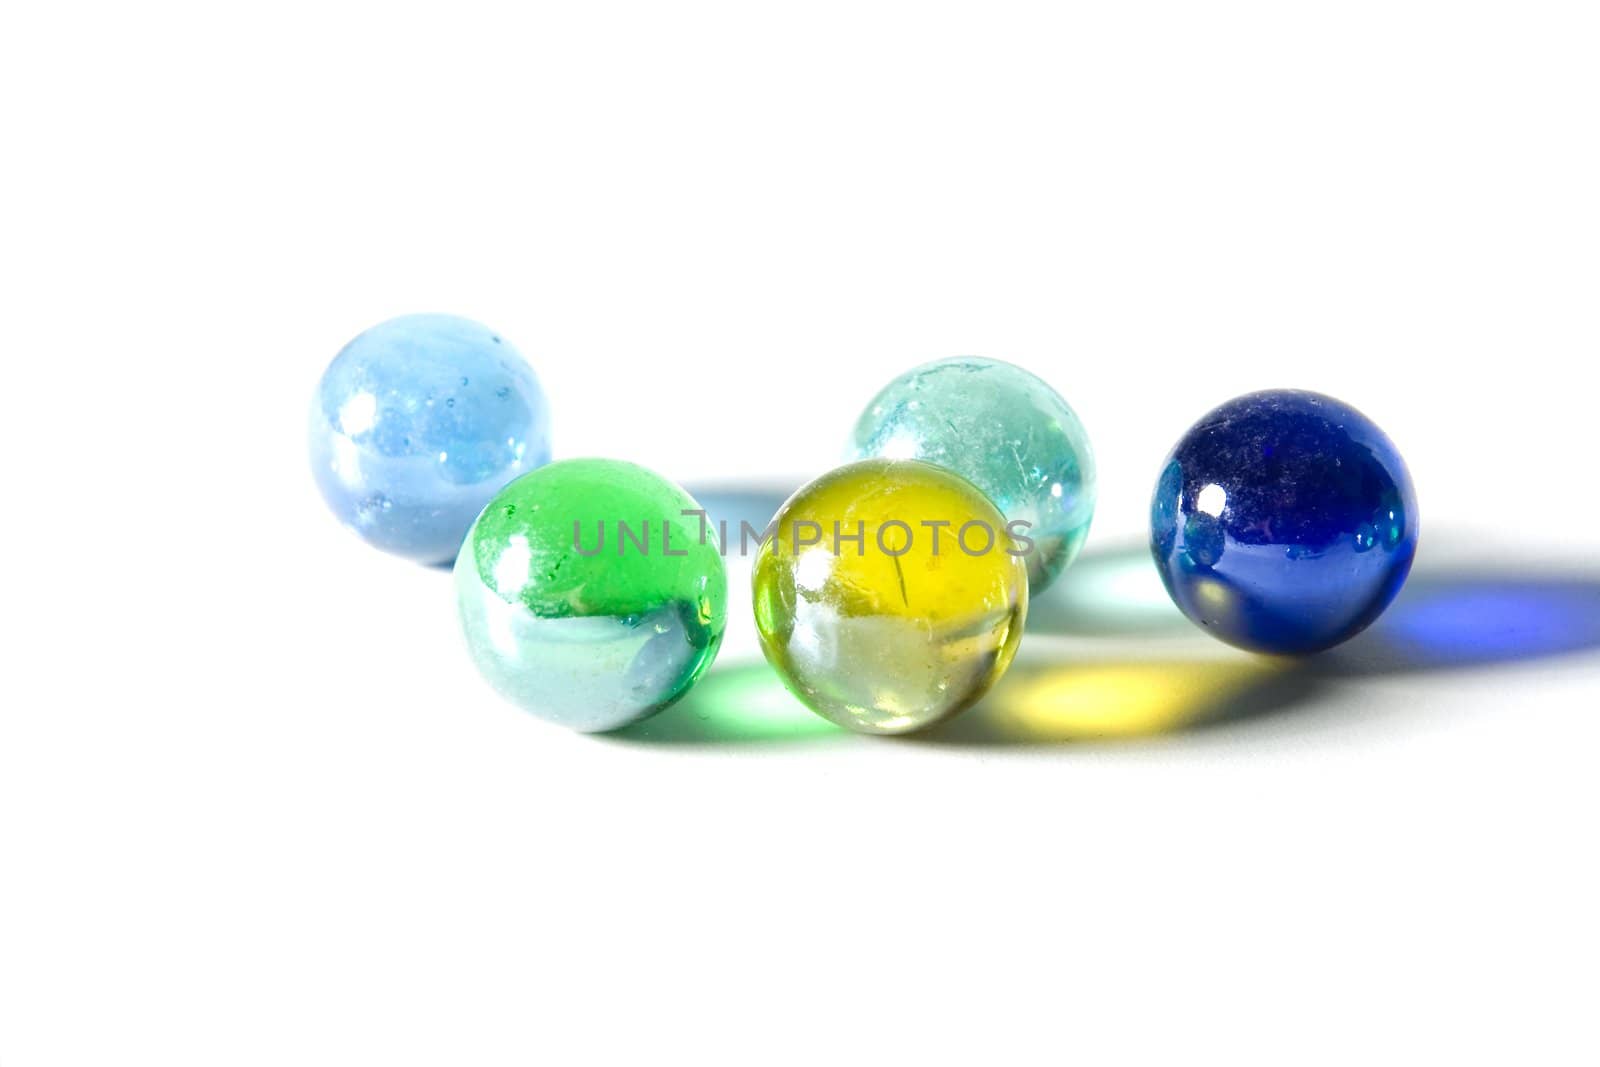 Studio shot of varicolored beautiful glass marbles on a white background